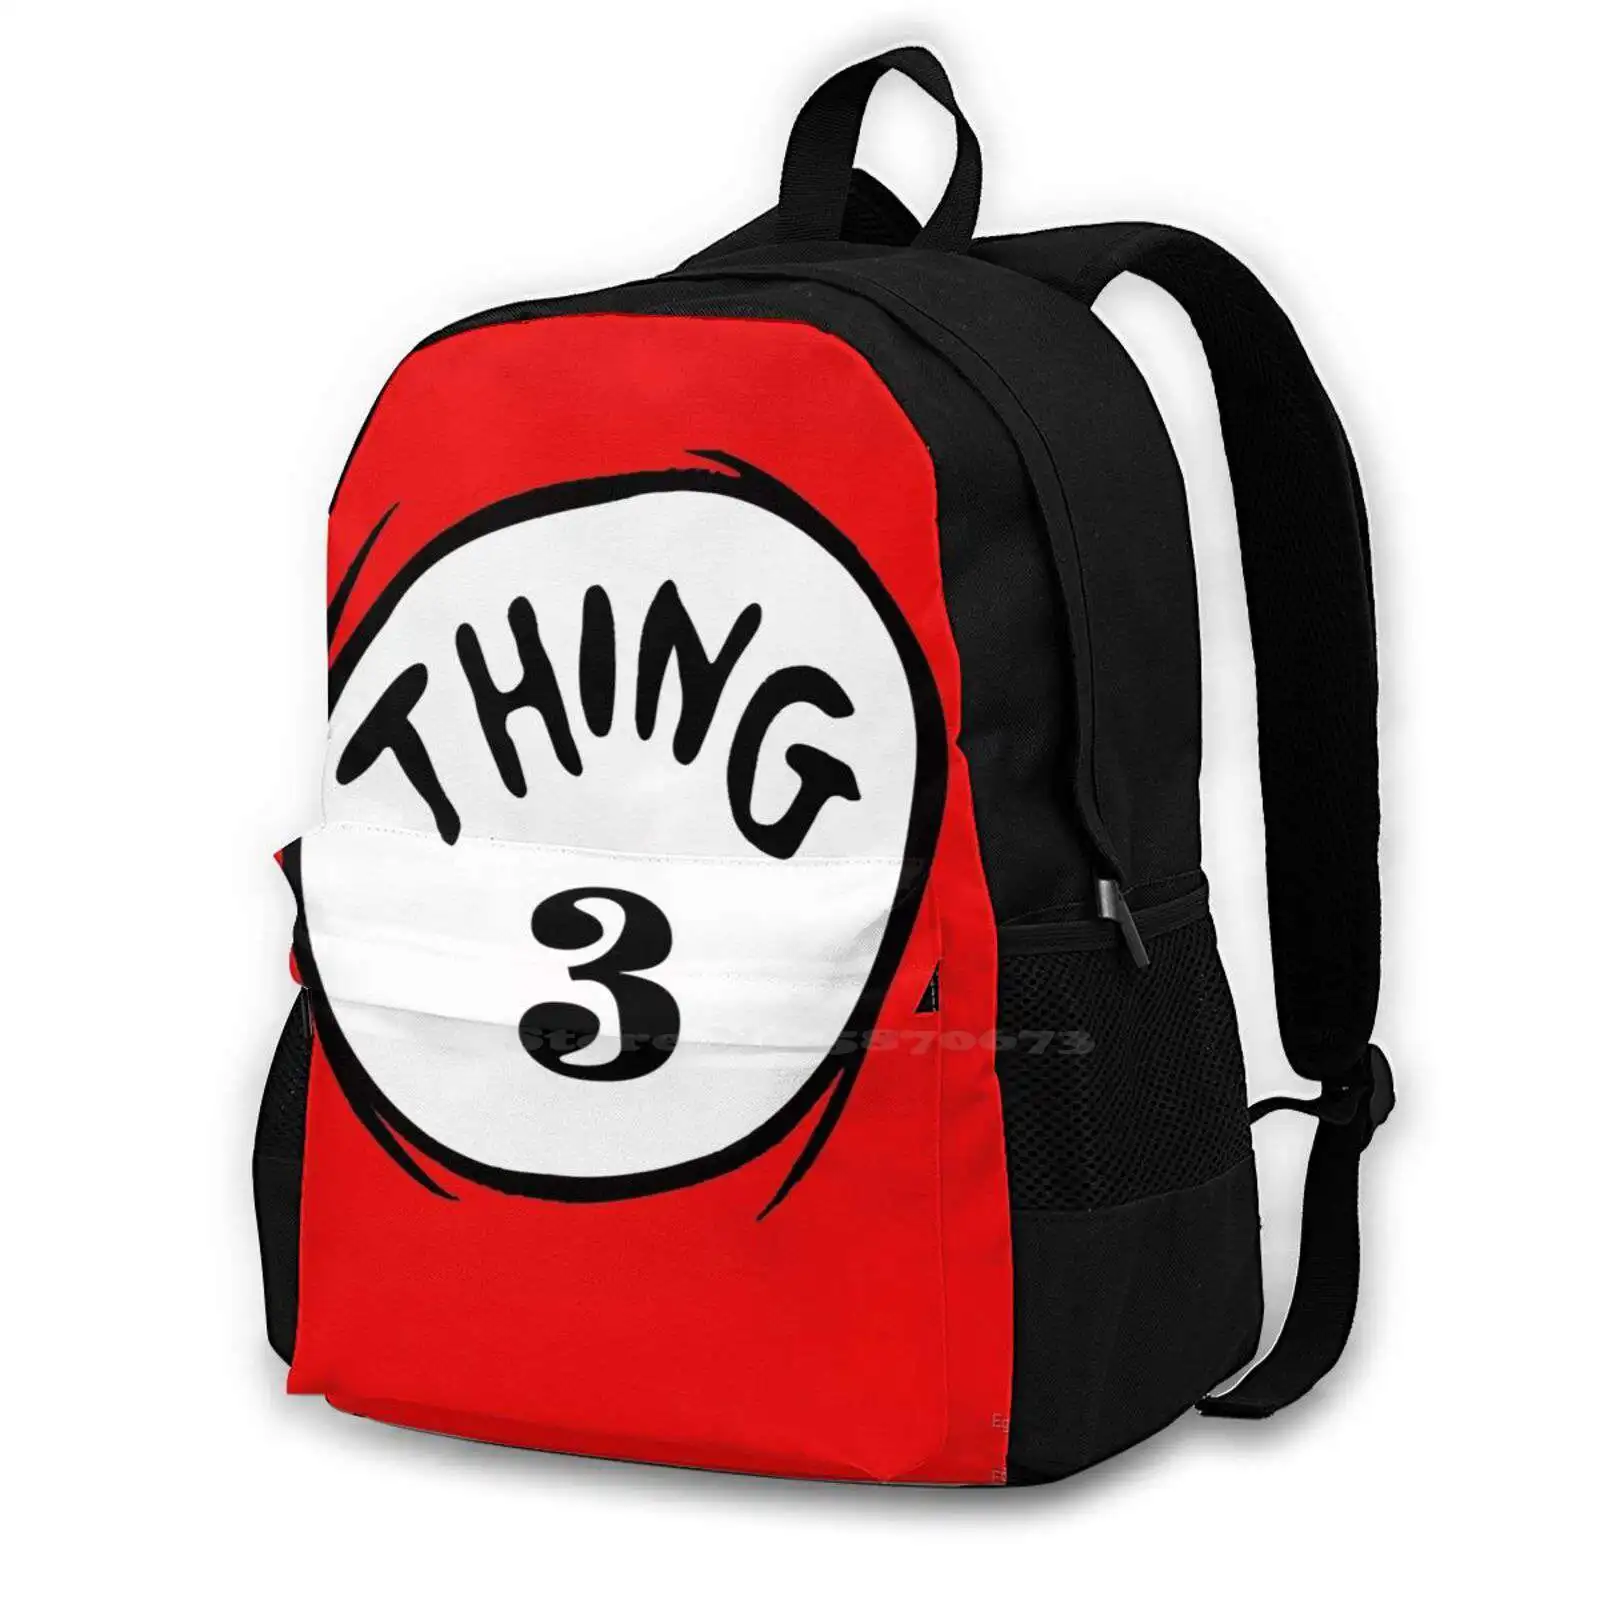 

Thing 3 Funny Three Two New Arrivals Satchel Schoolbag Bags Backpack Thing 3 3 Three Thing Thing 1 And 2 Twins Twins 2 Twin